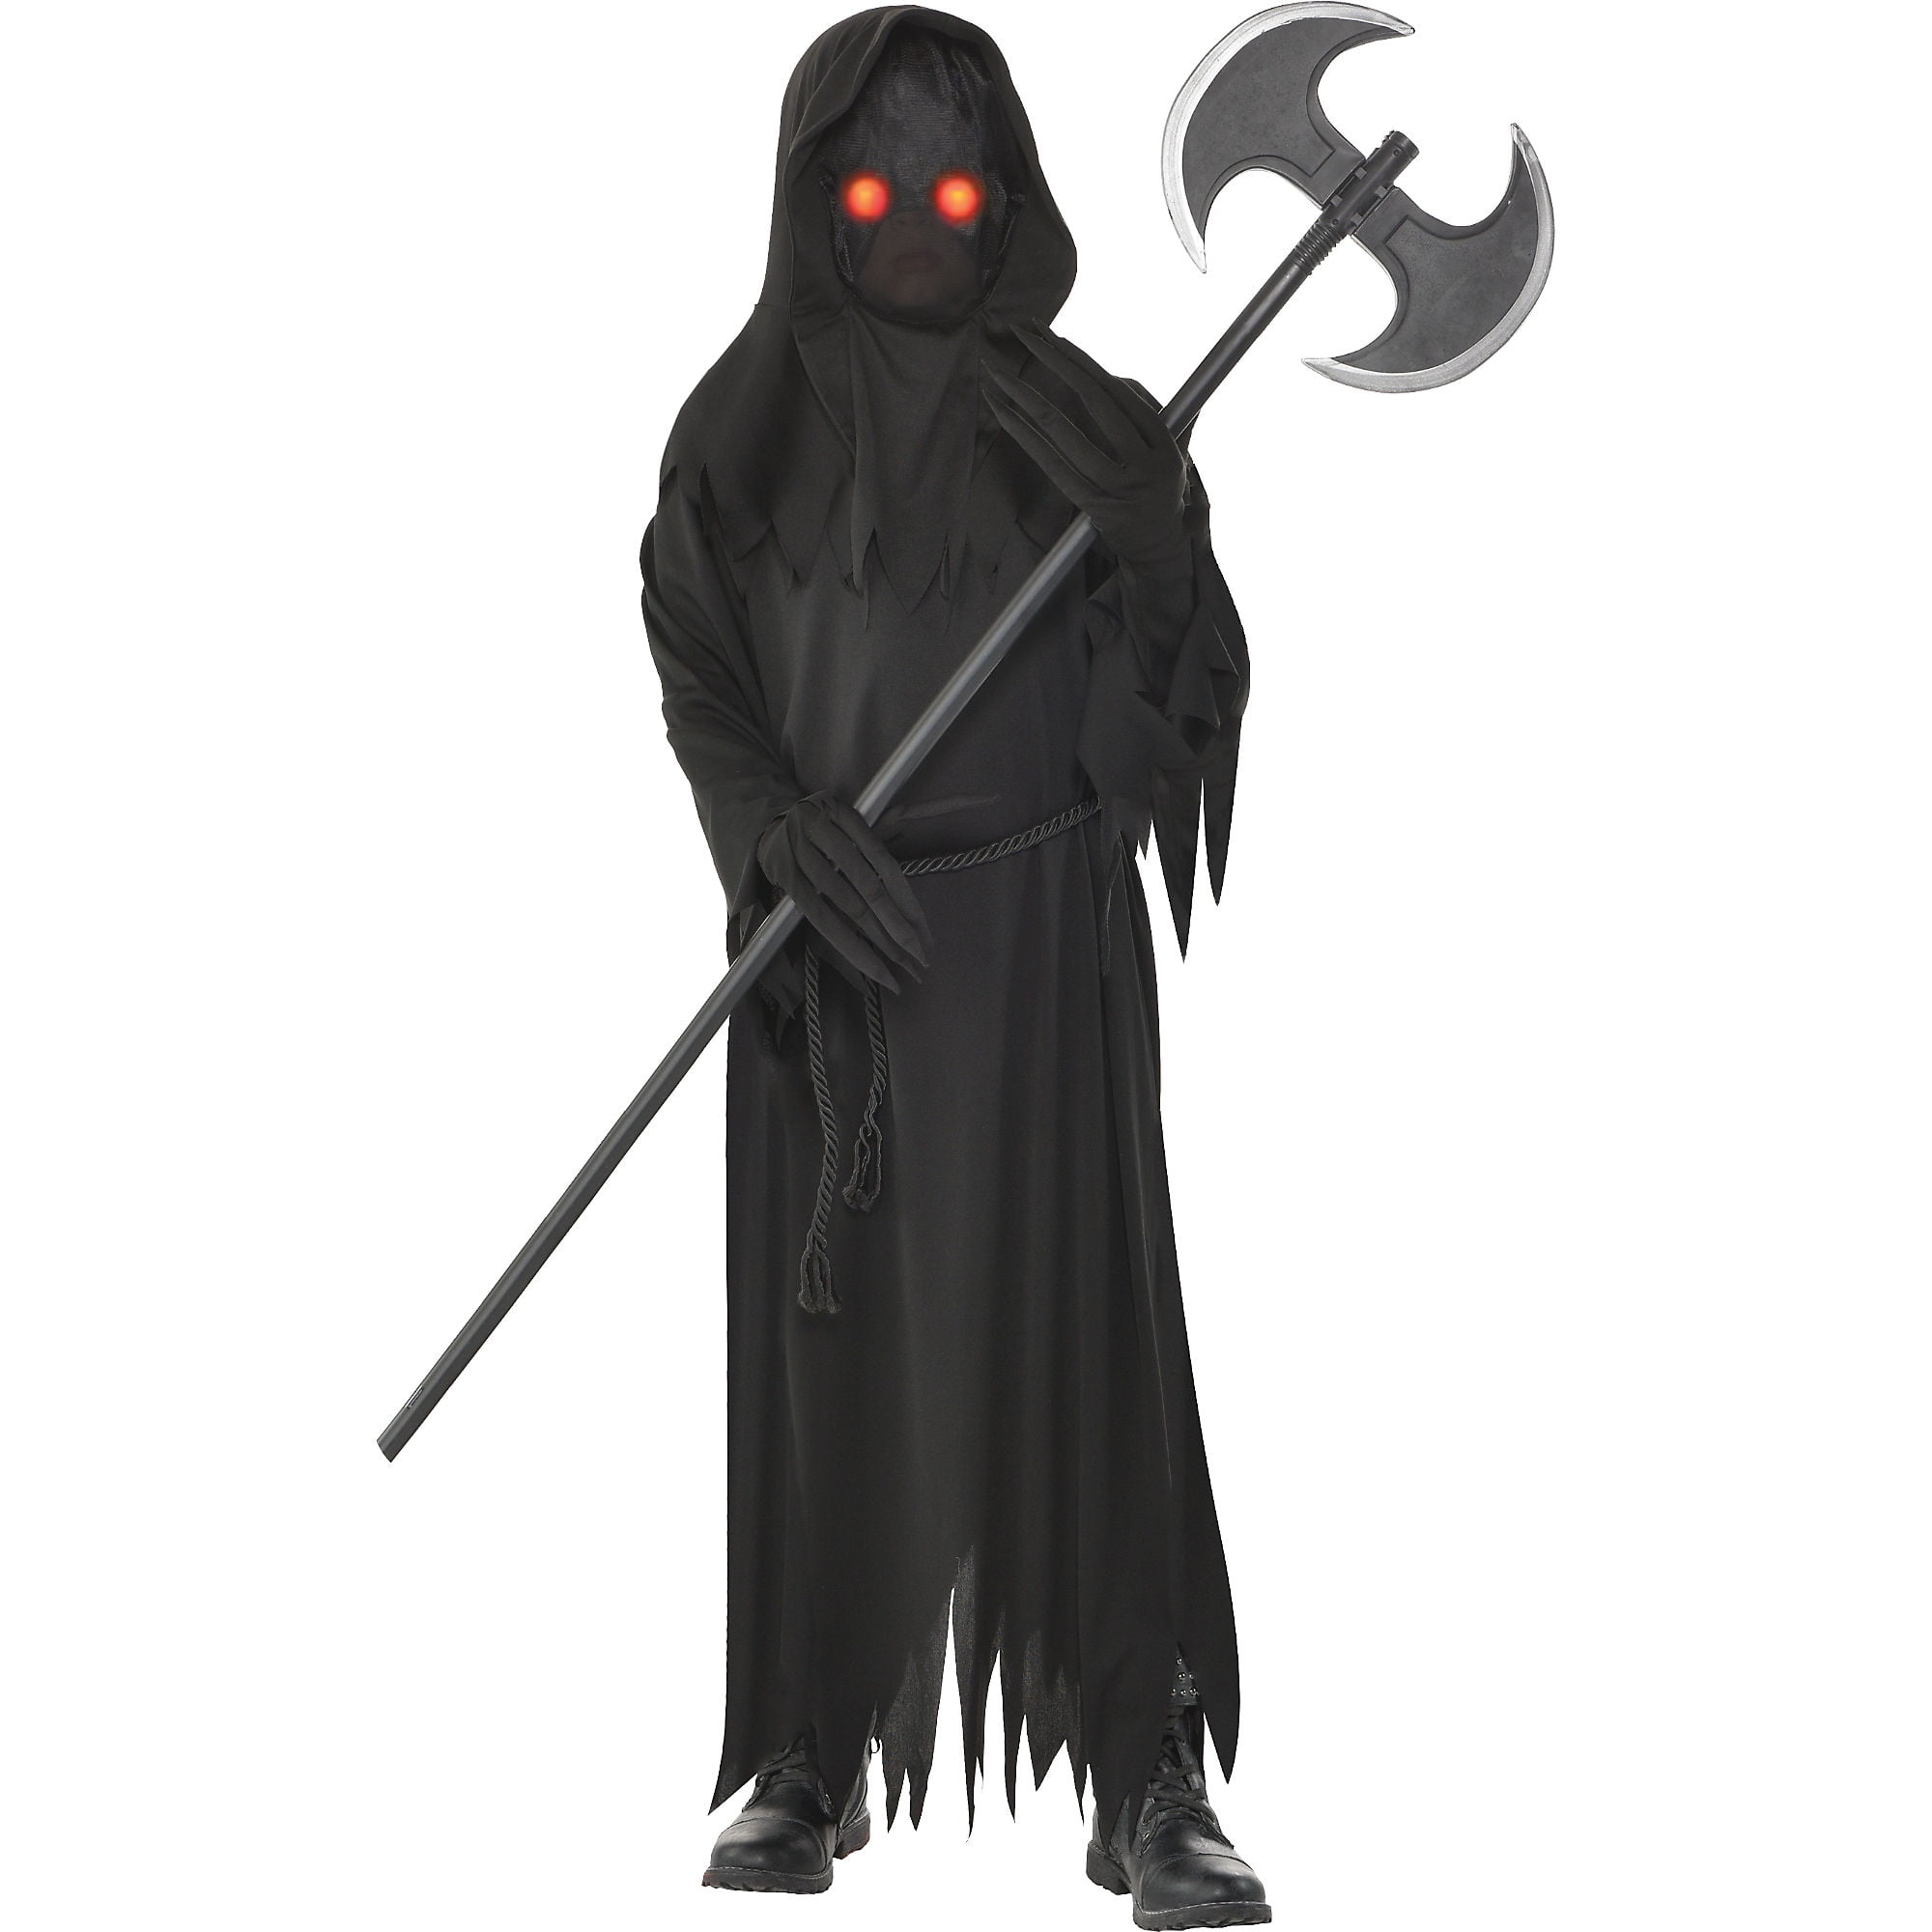 Childs Boy's Grim Reaper Hooded Horror Death Robe Costume Large 12-14